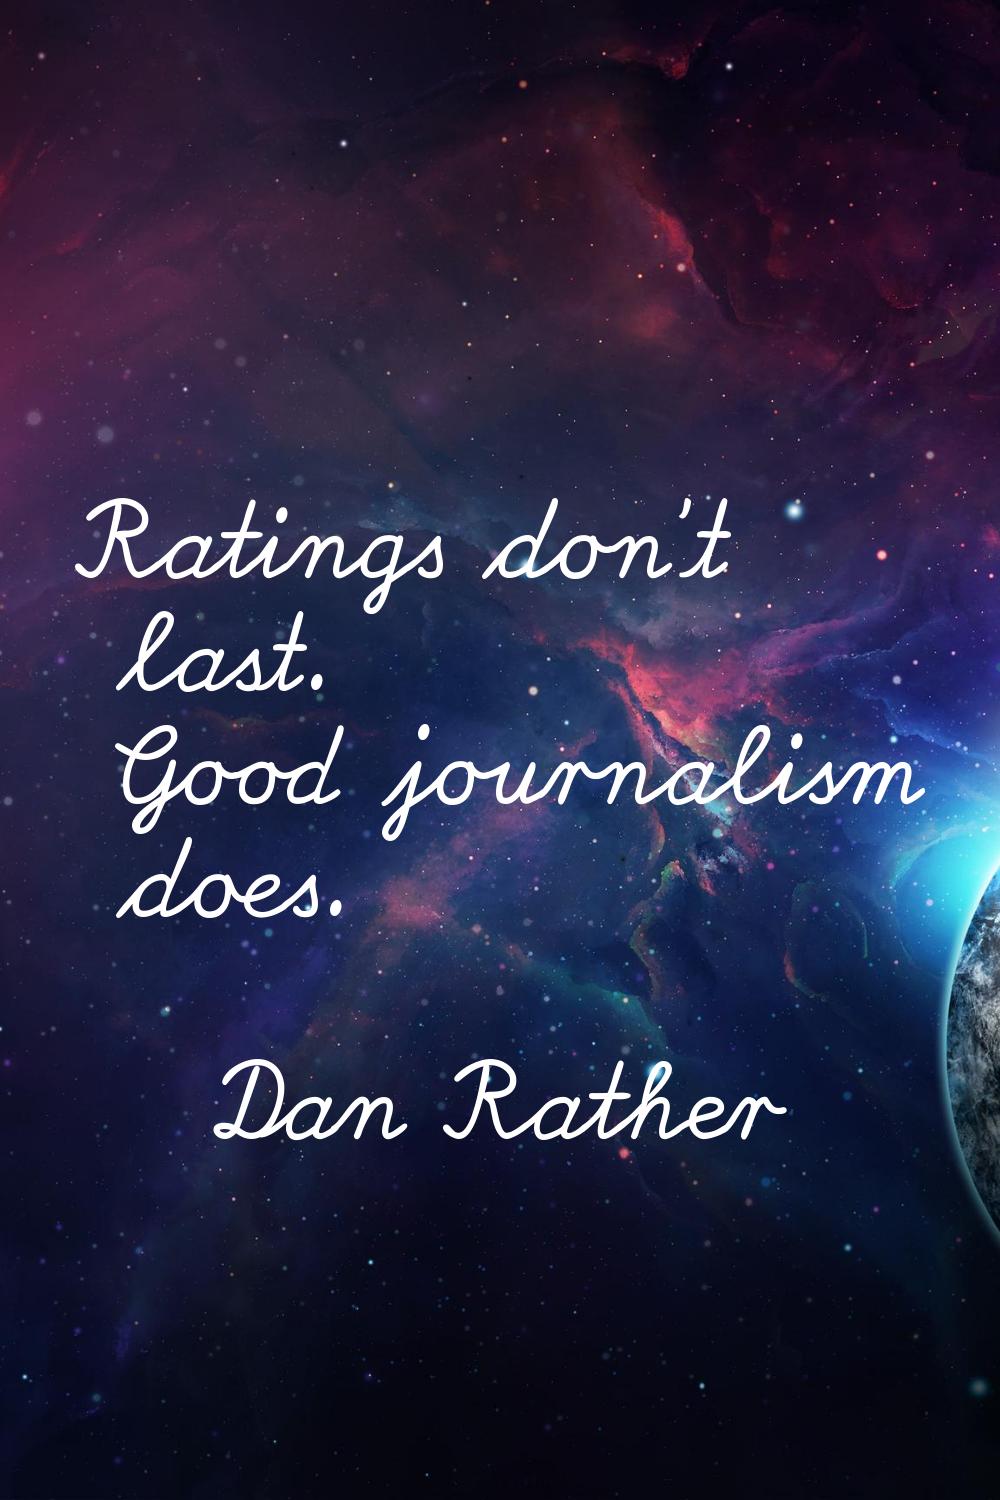 Ratings don't last. Good journalism does.